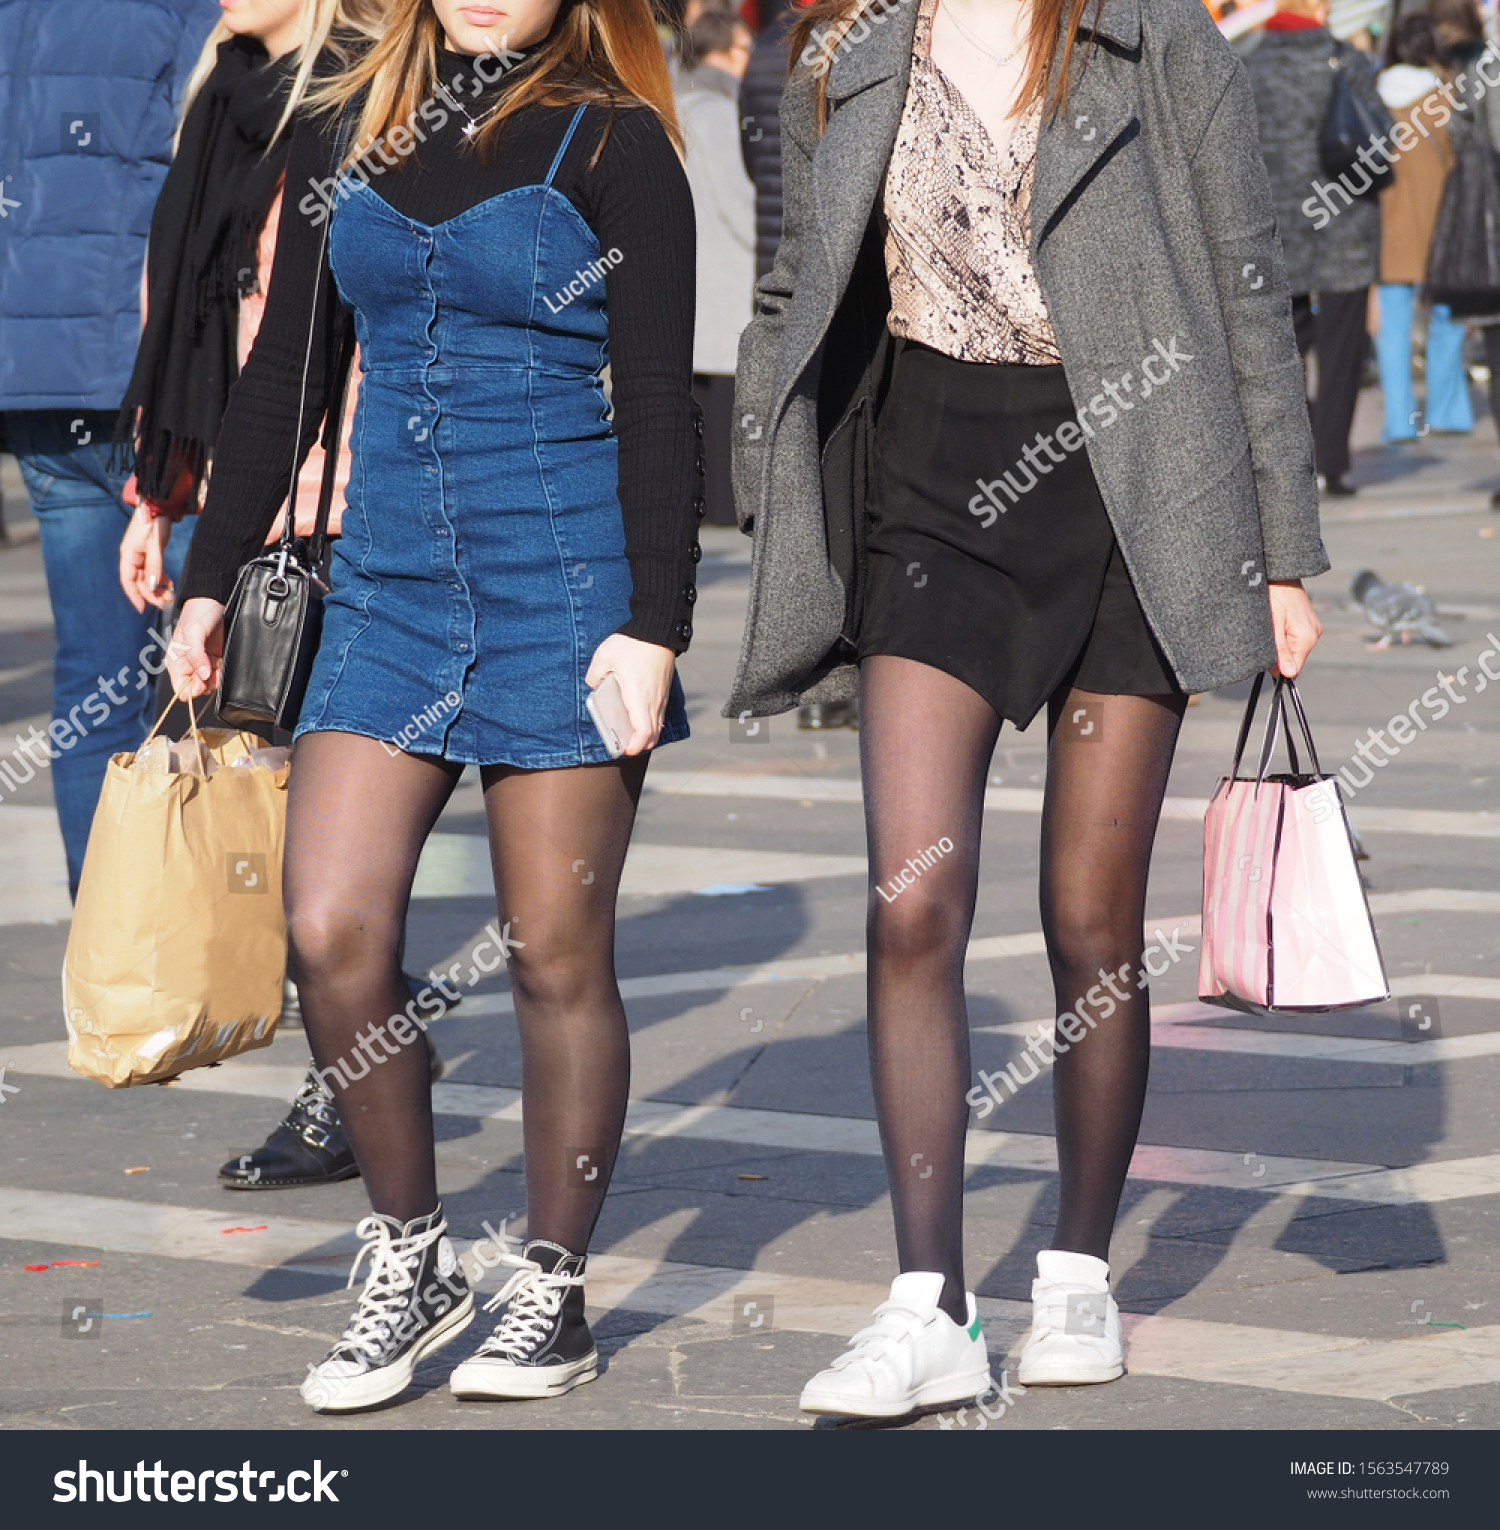 Women in mini skirts and pantyhose